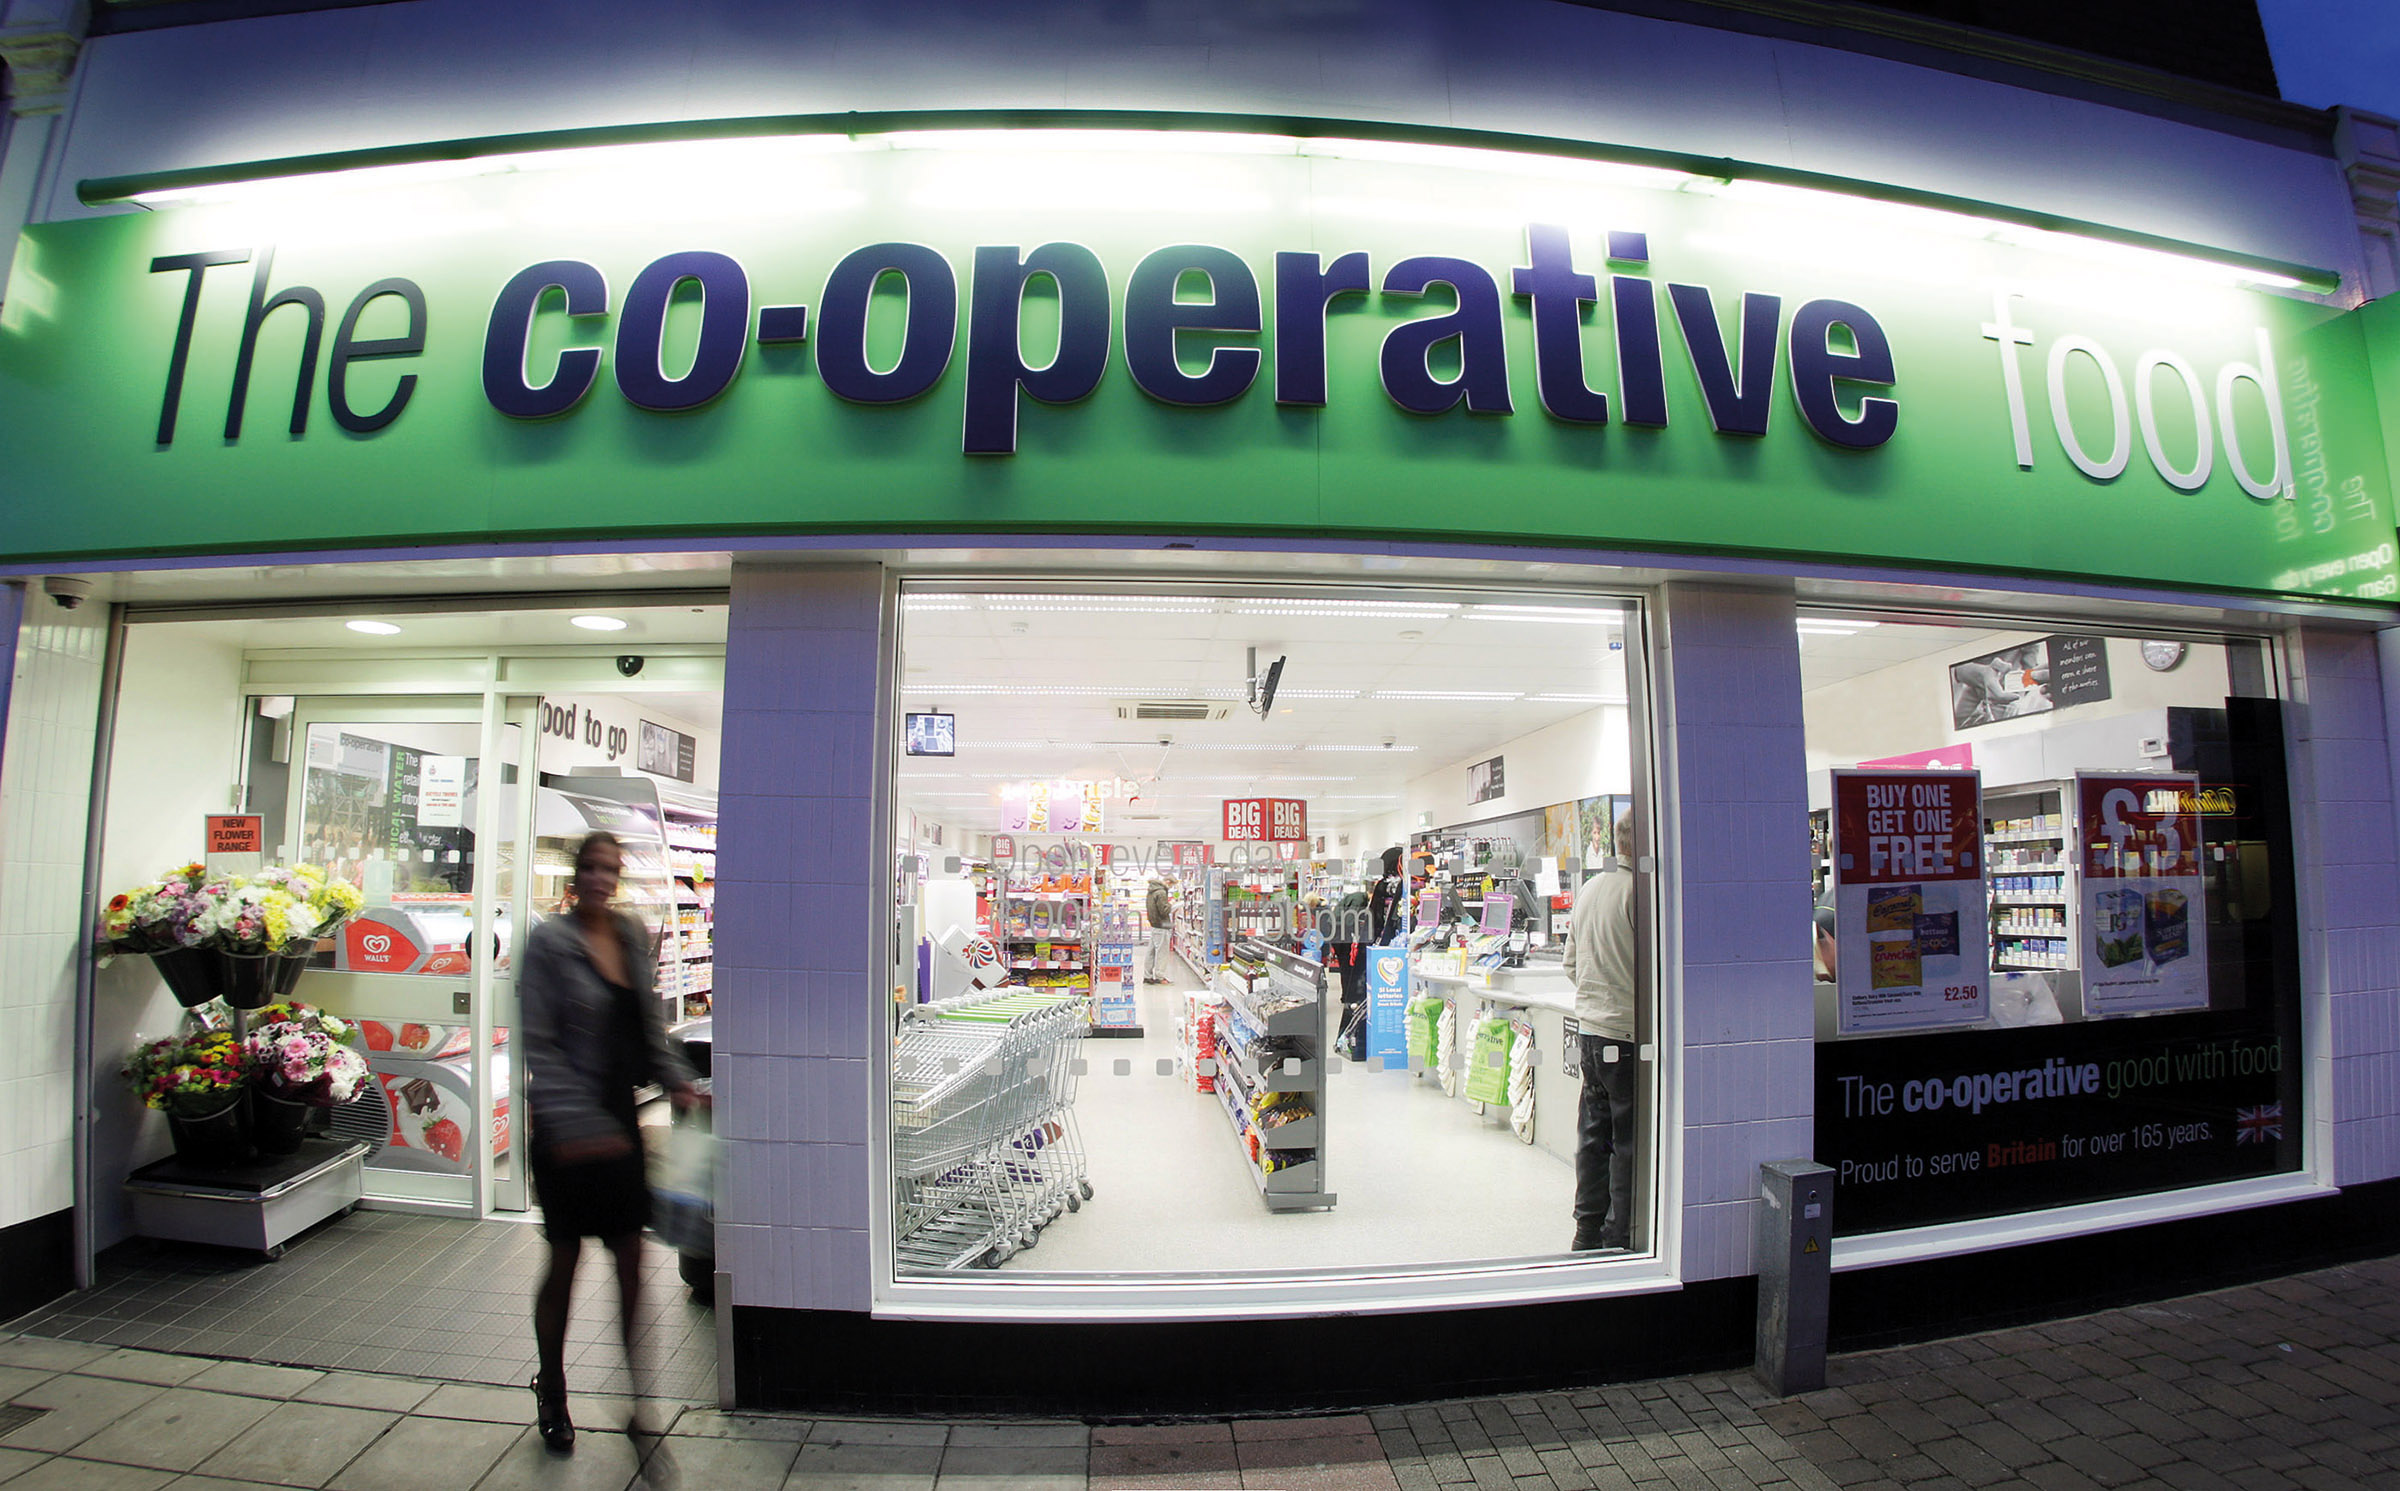 Co op CEO Steve Murrells Warns Price rises as stores struggle against supply issues!